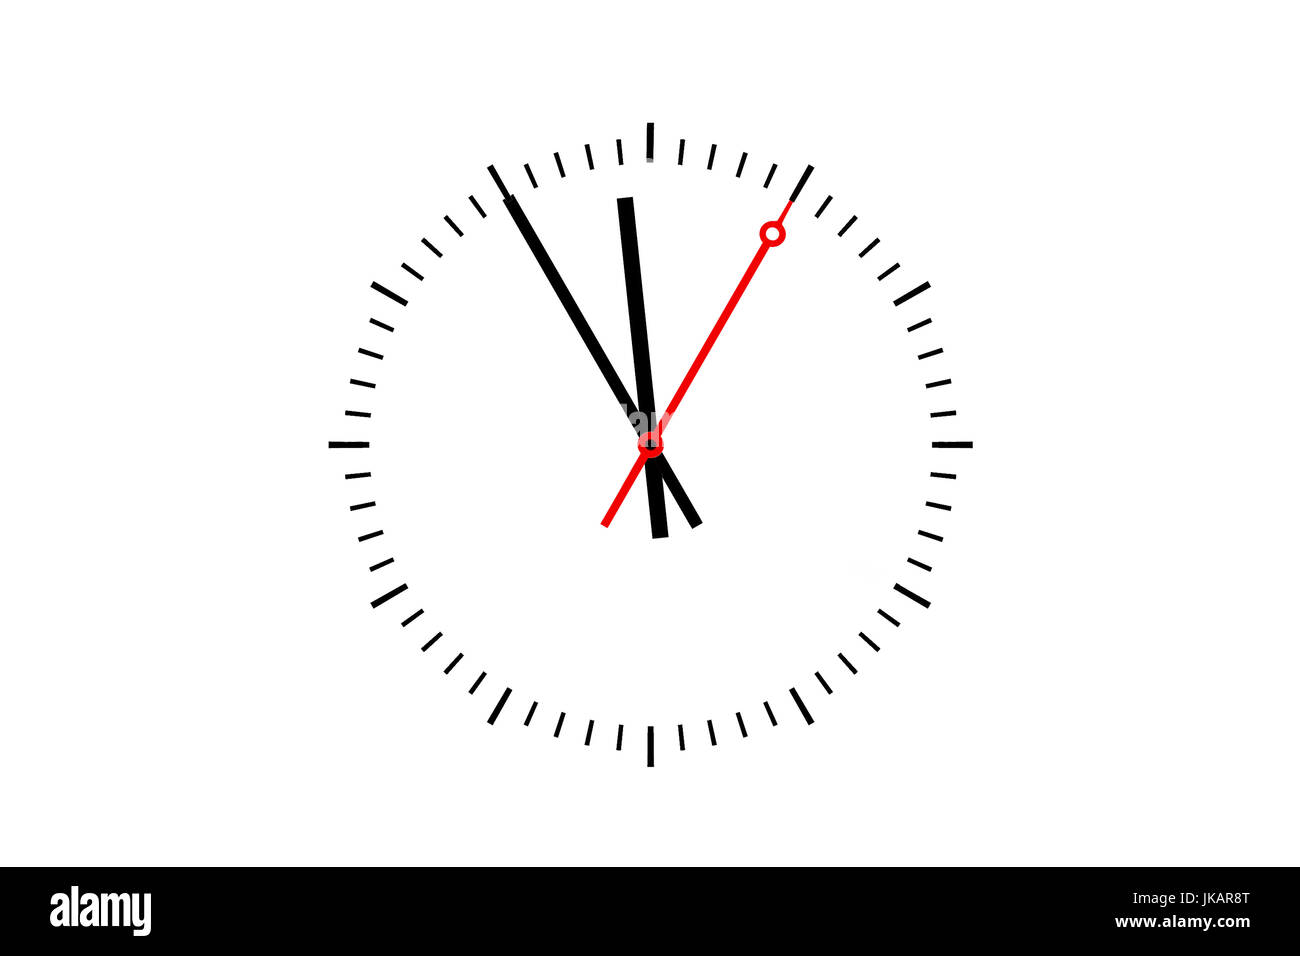 Clock, Digits sheet with hour hand, minute hand and a red second hand indicates the time 5 before 12. Copy space on white background. Stock Photo